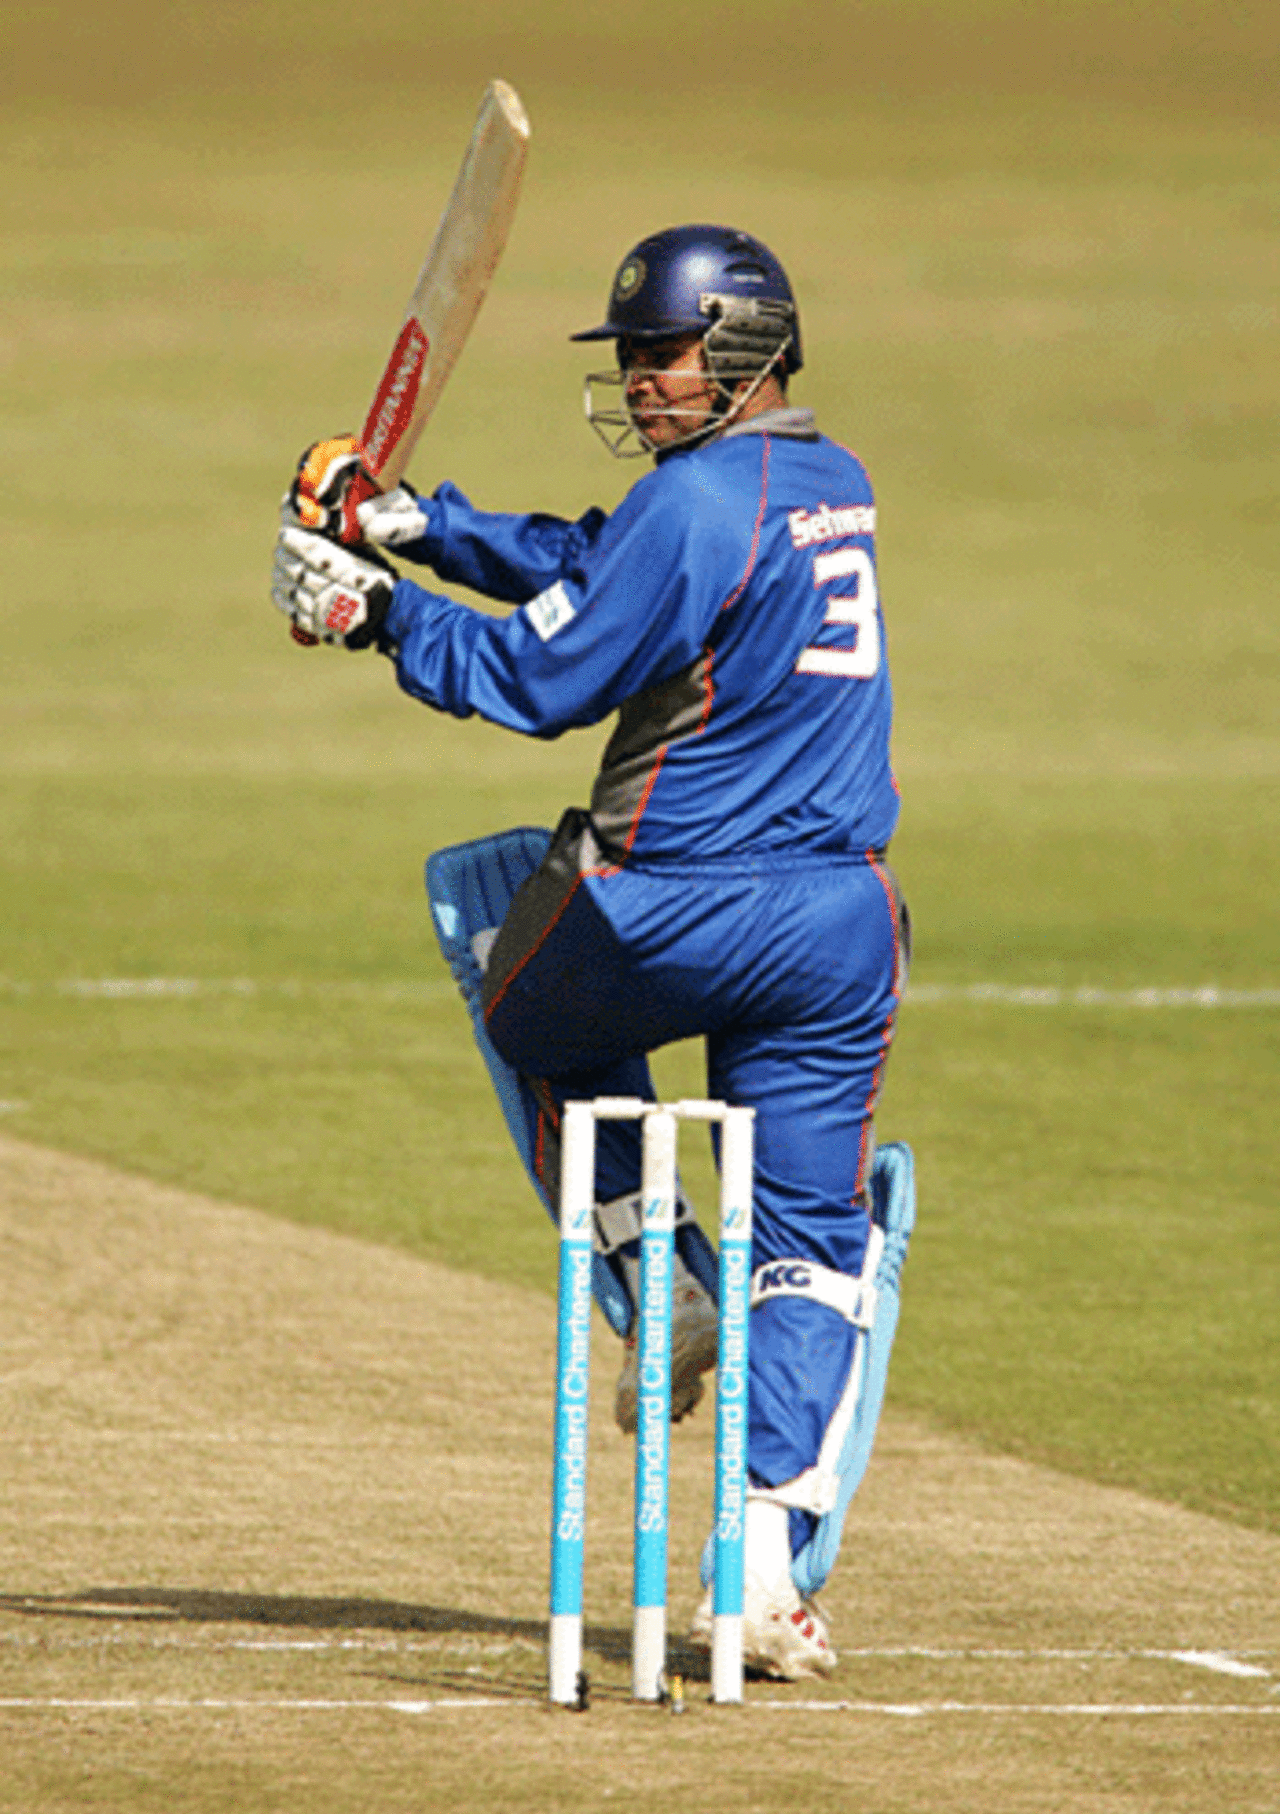 Virender Sehwag looked scratchy during his innings of 38, Asia XI v Africa XI, Durban, August 20